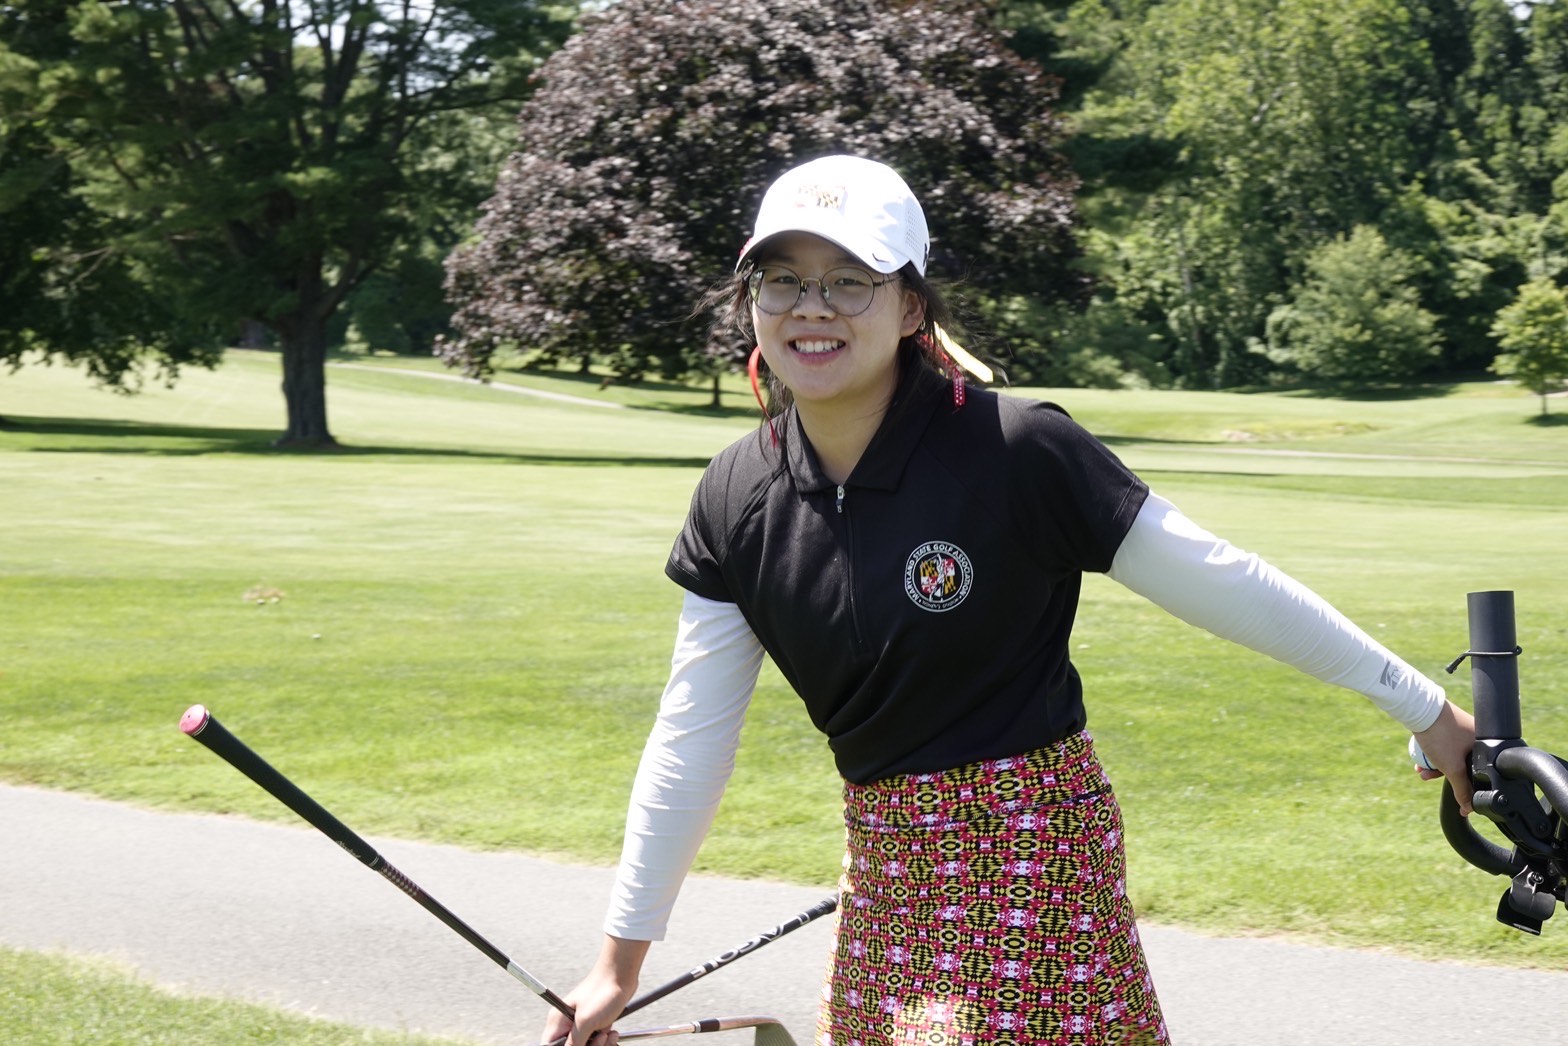 Senior Fannie Sukhumparnich is one of the captains of the WJ Golf Team. This year, she won fifth place in the Maryland Golf Championship Individual Girls event. It was nice to see my friends there. Golf allows me to connect with many people, Sukhumparnich said.